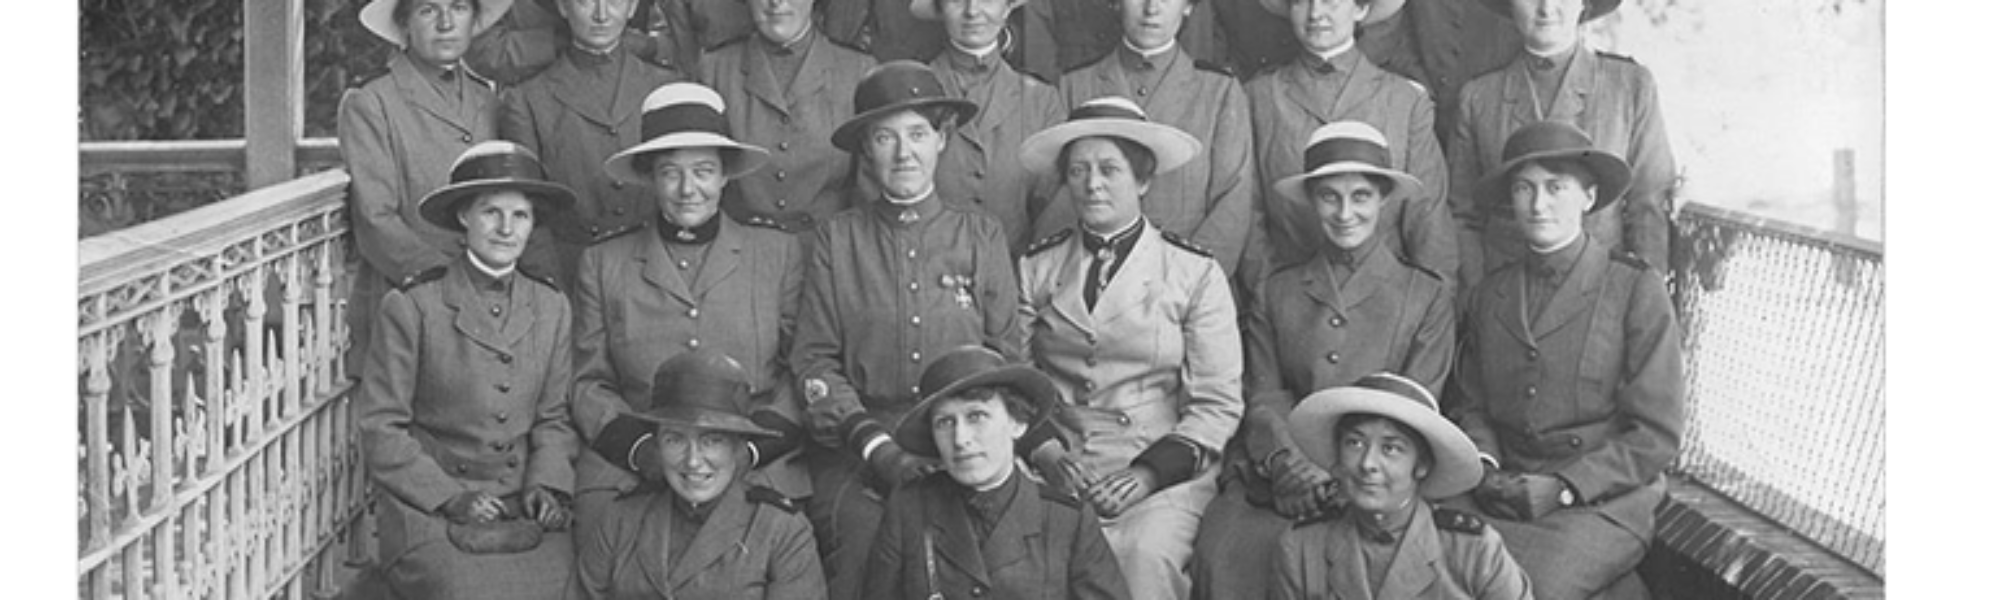 Twenty two nurses photographed prior to leaving South Australia during World War I. These nurses were tendered a farewell at the Edith Cavell Army Nurses' Clubrooms, North Terrace, on 20 December 1916. Image credit: State Library of South Australia, PRG280/1/9/60, 1916.